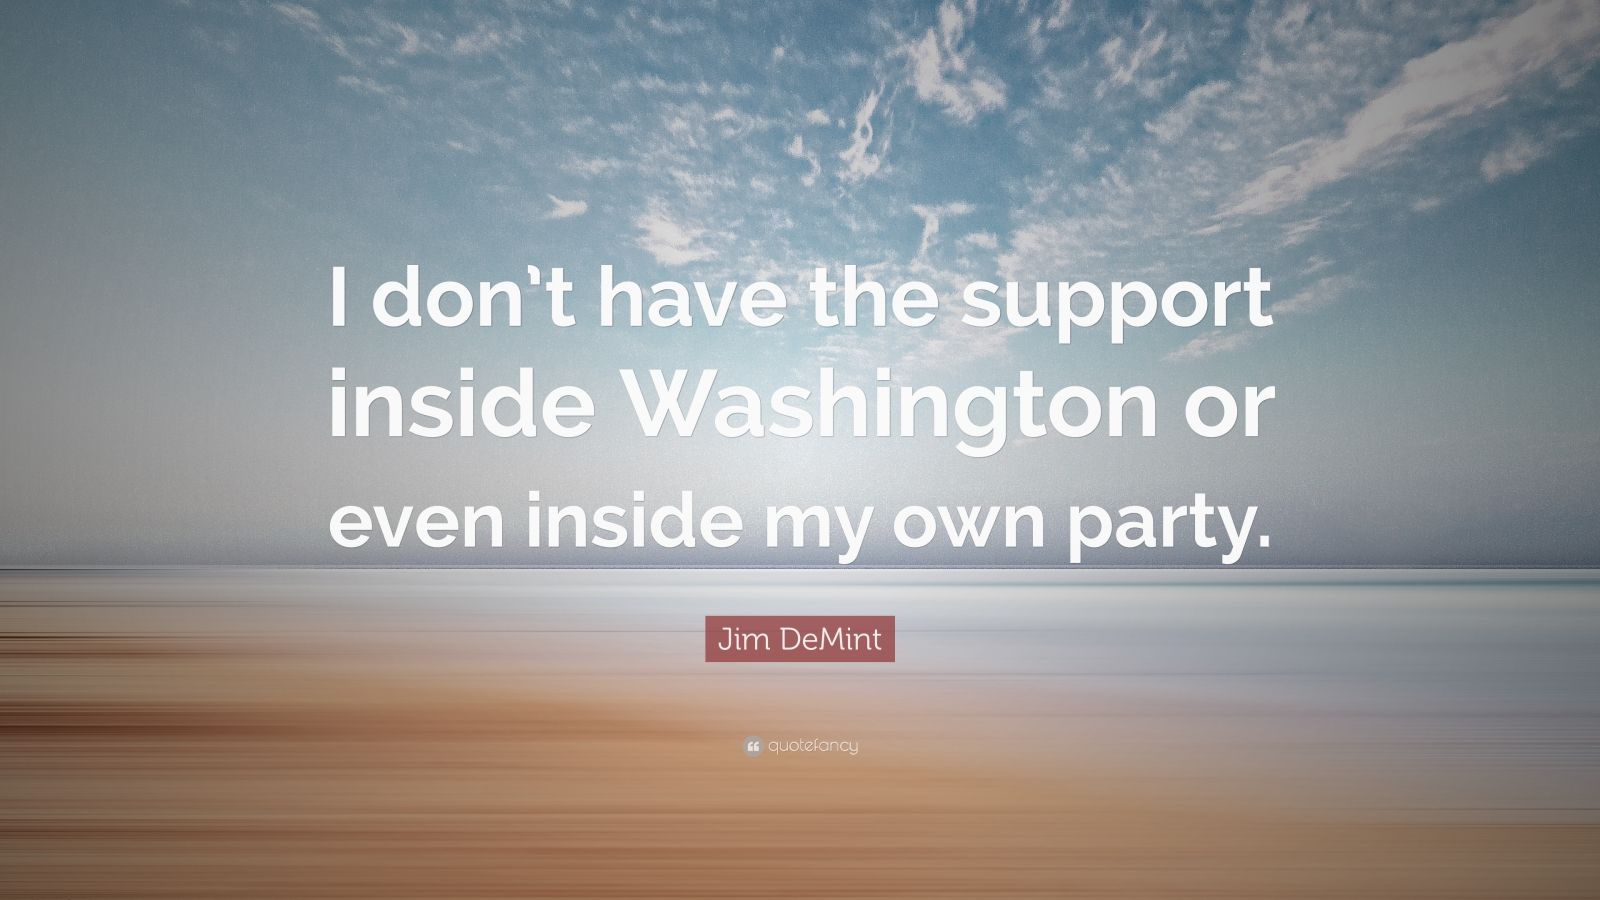 Jim Demint Quote “i Dont Have The Support Inside Washington Or Even Inside My Own Party” 9207